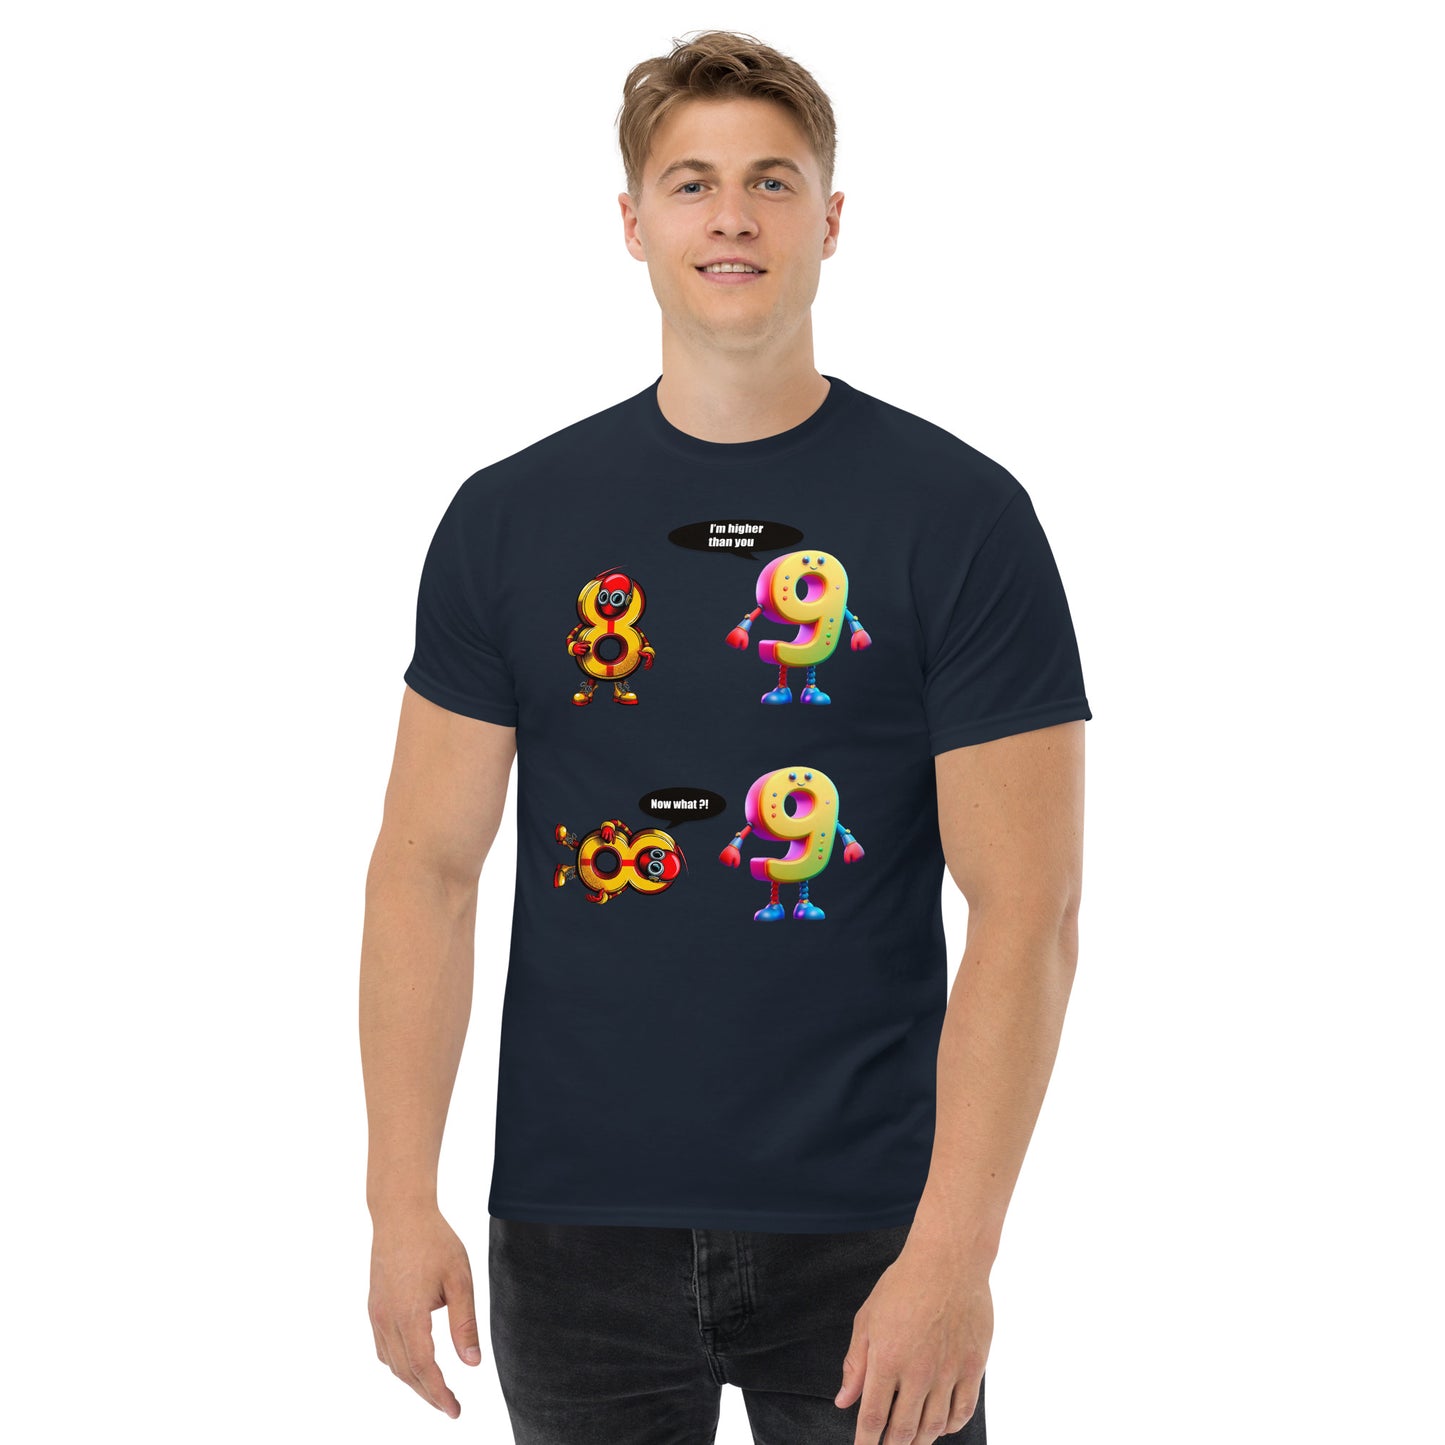 Man with navy blue t-shirt with picture of 8 and 9 having a discussion 